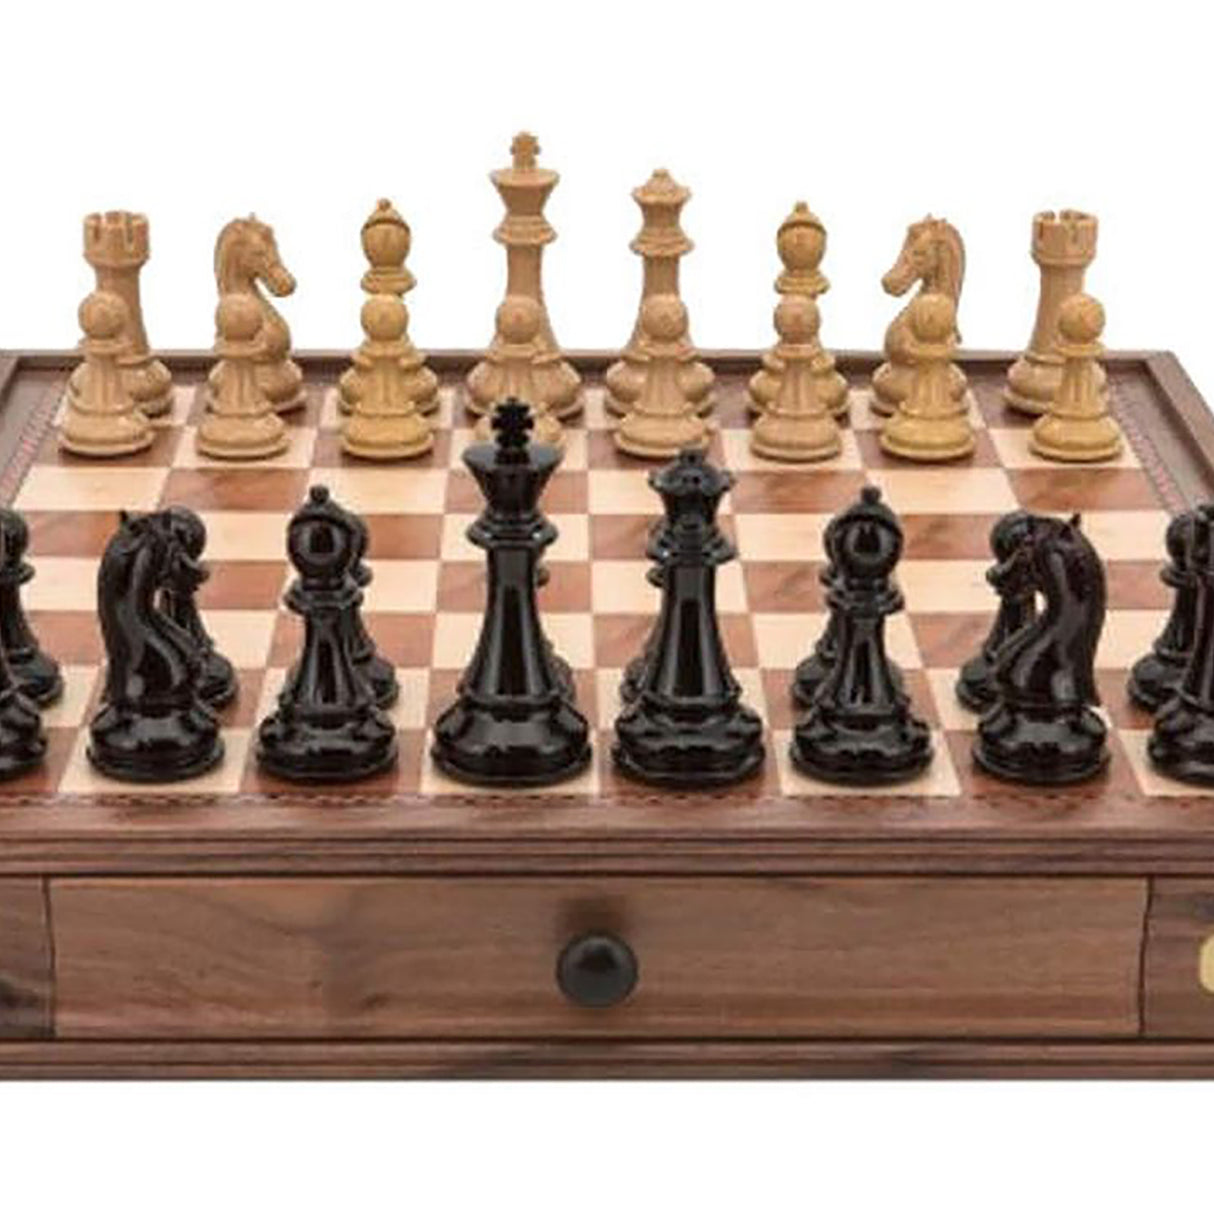 Dal Rossi Chess Set (20 inches)